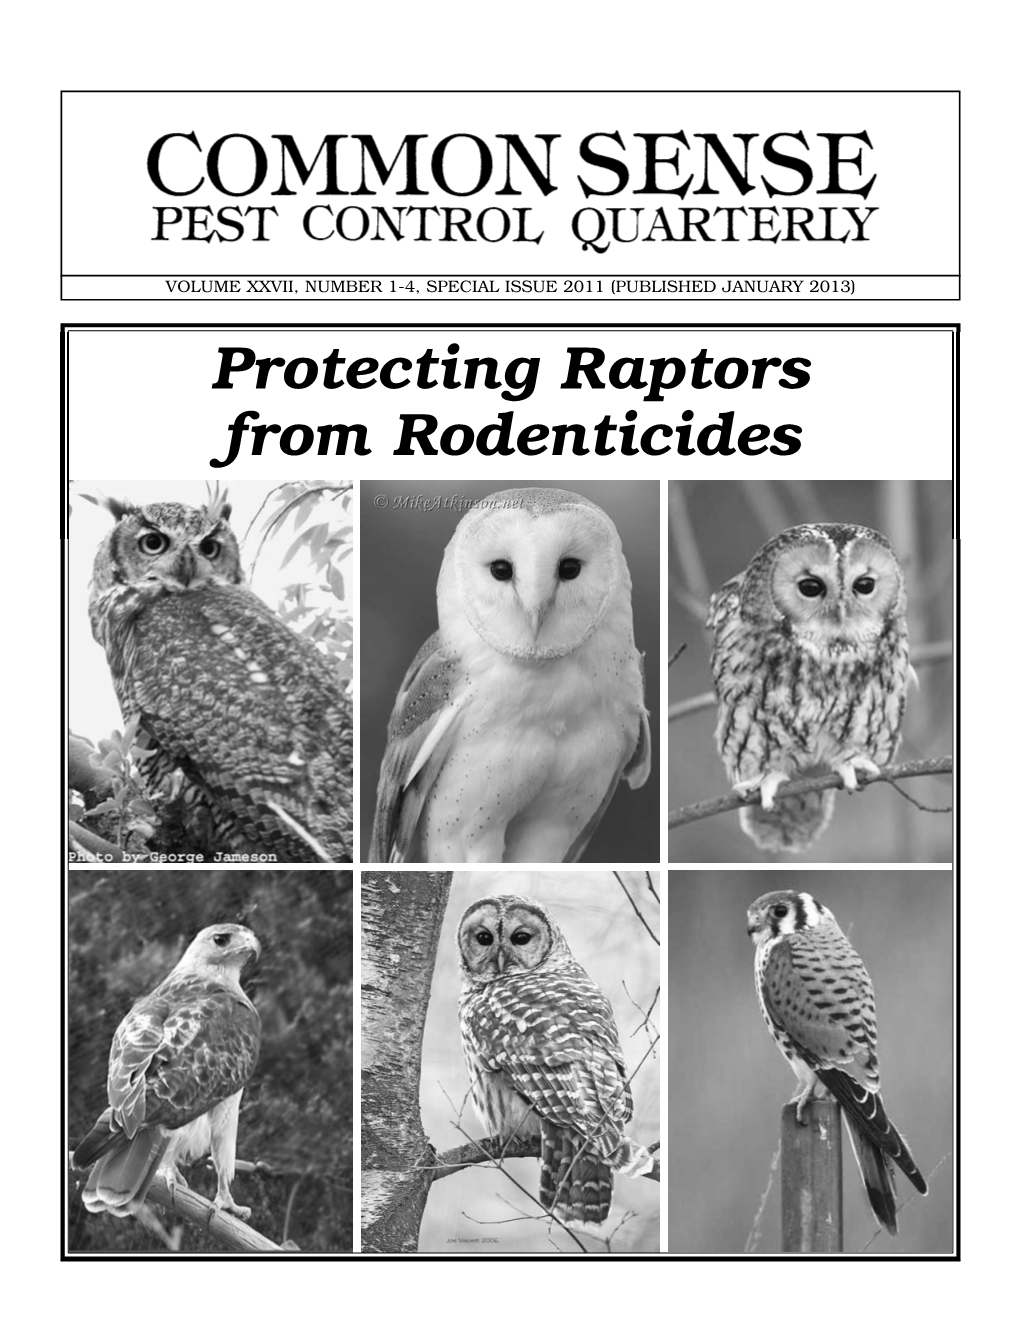 Protecting Raptors from Rodenticides 2